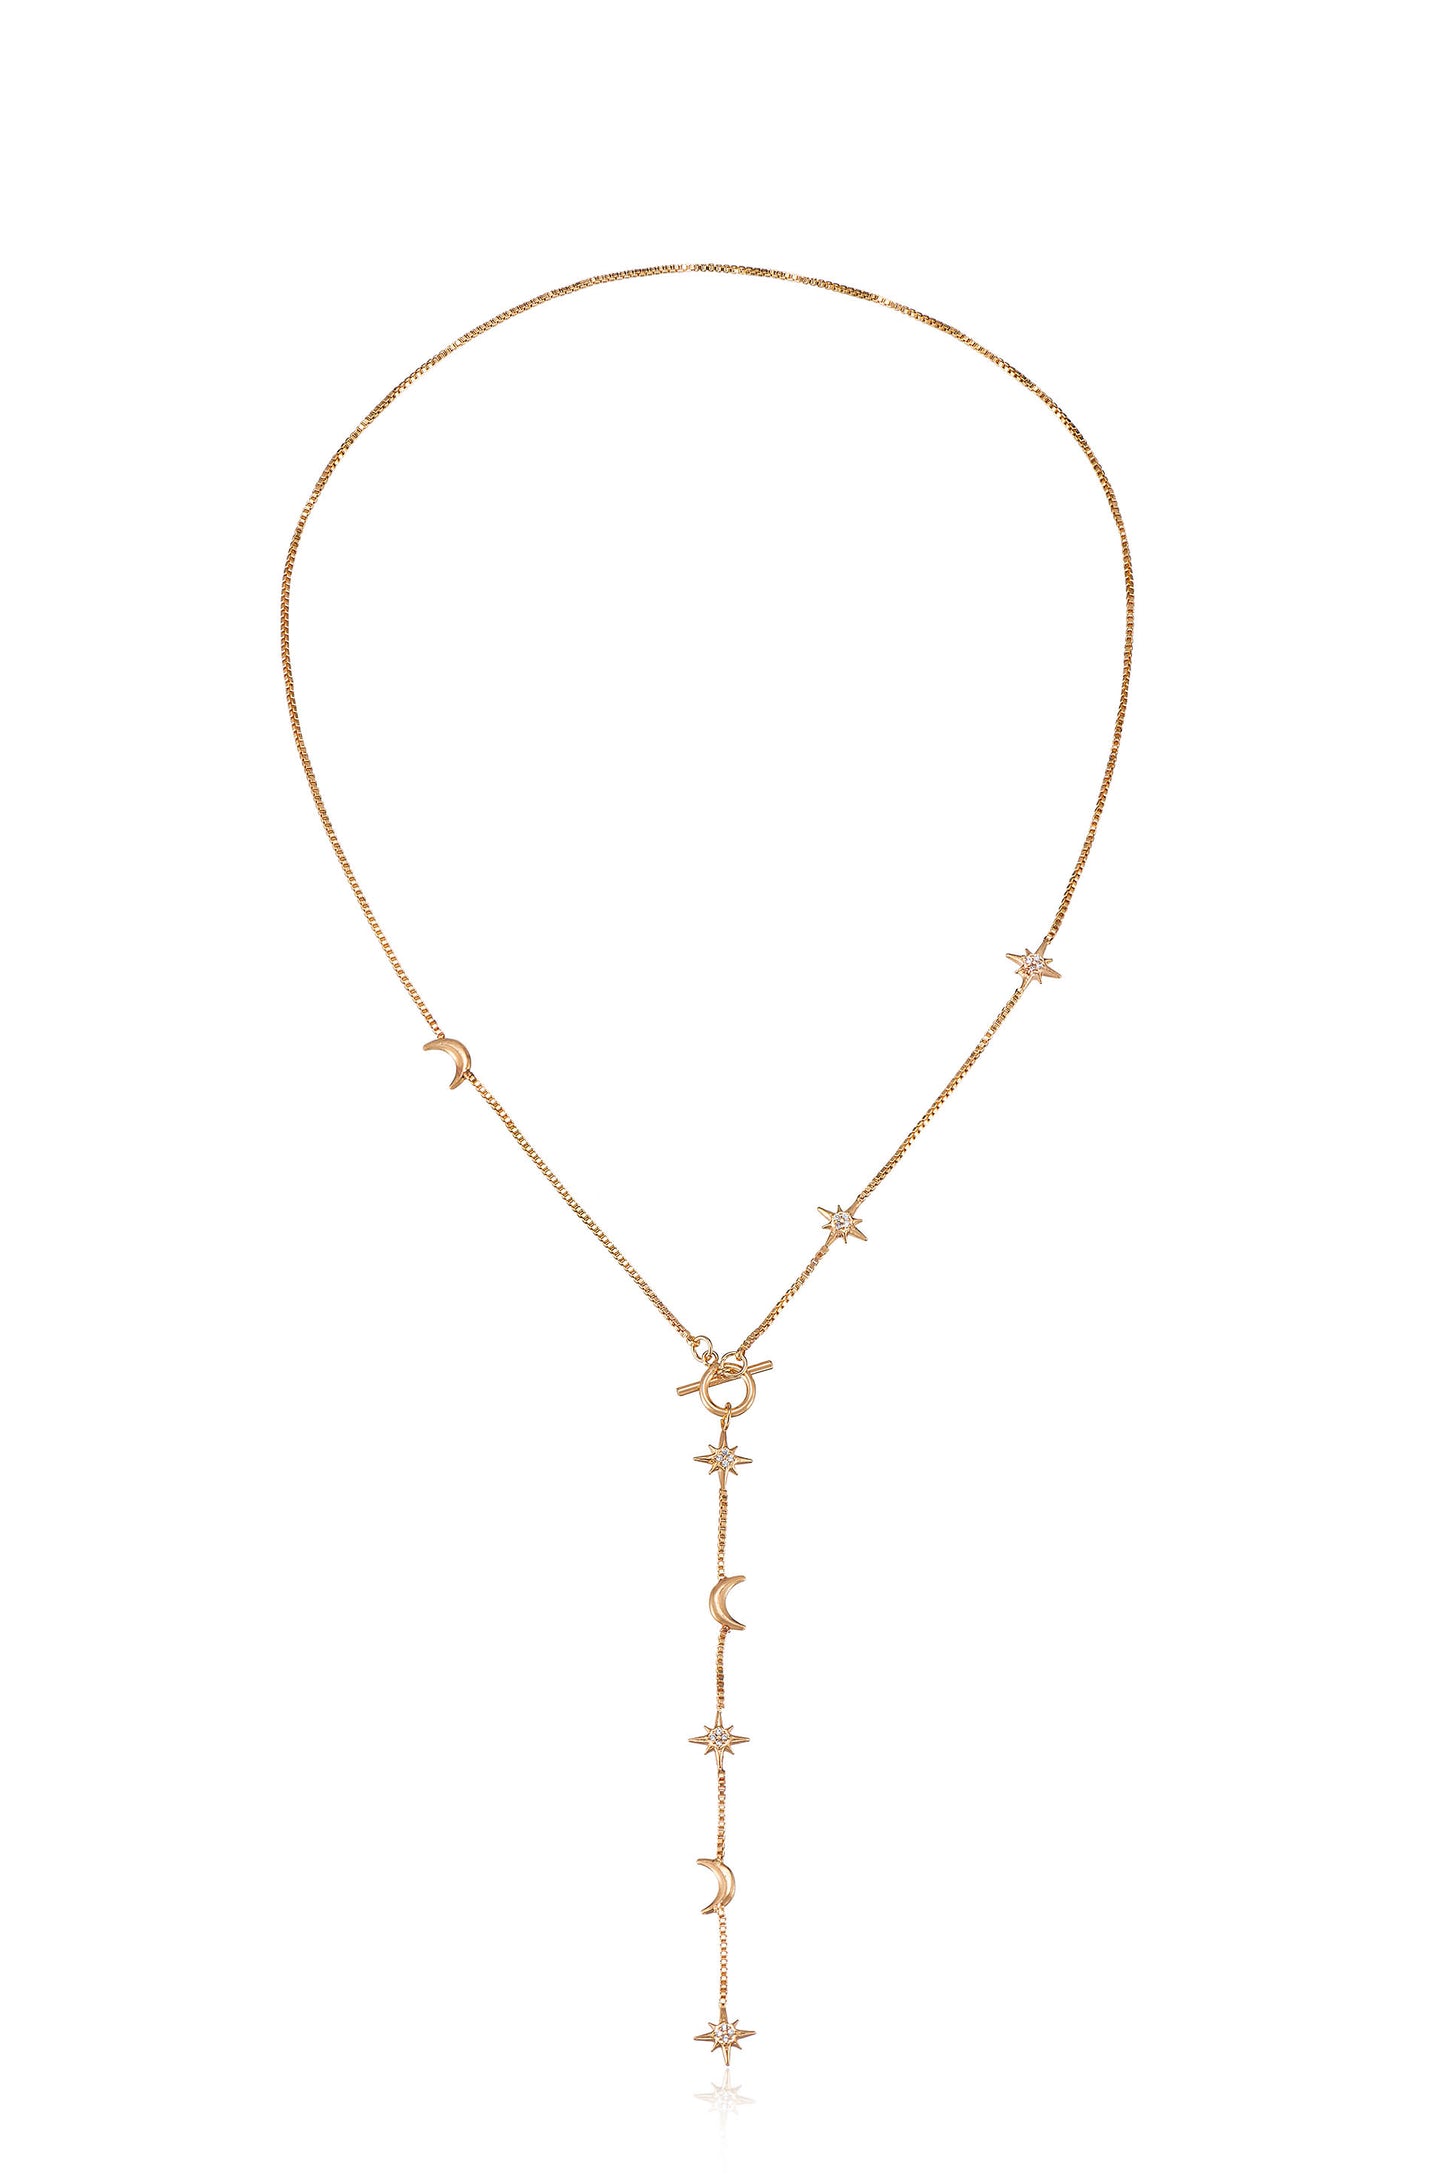 Delicate Celestial 18k Gold Plated Lariat Necklace full